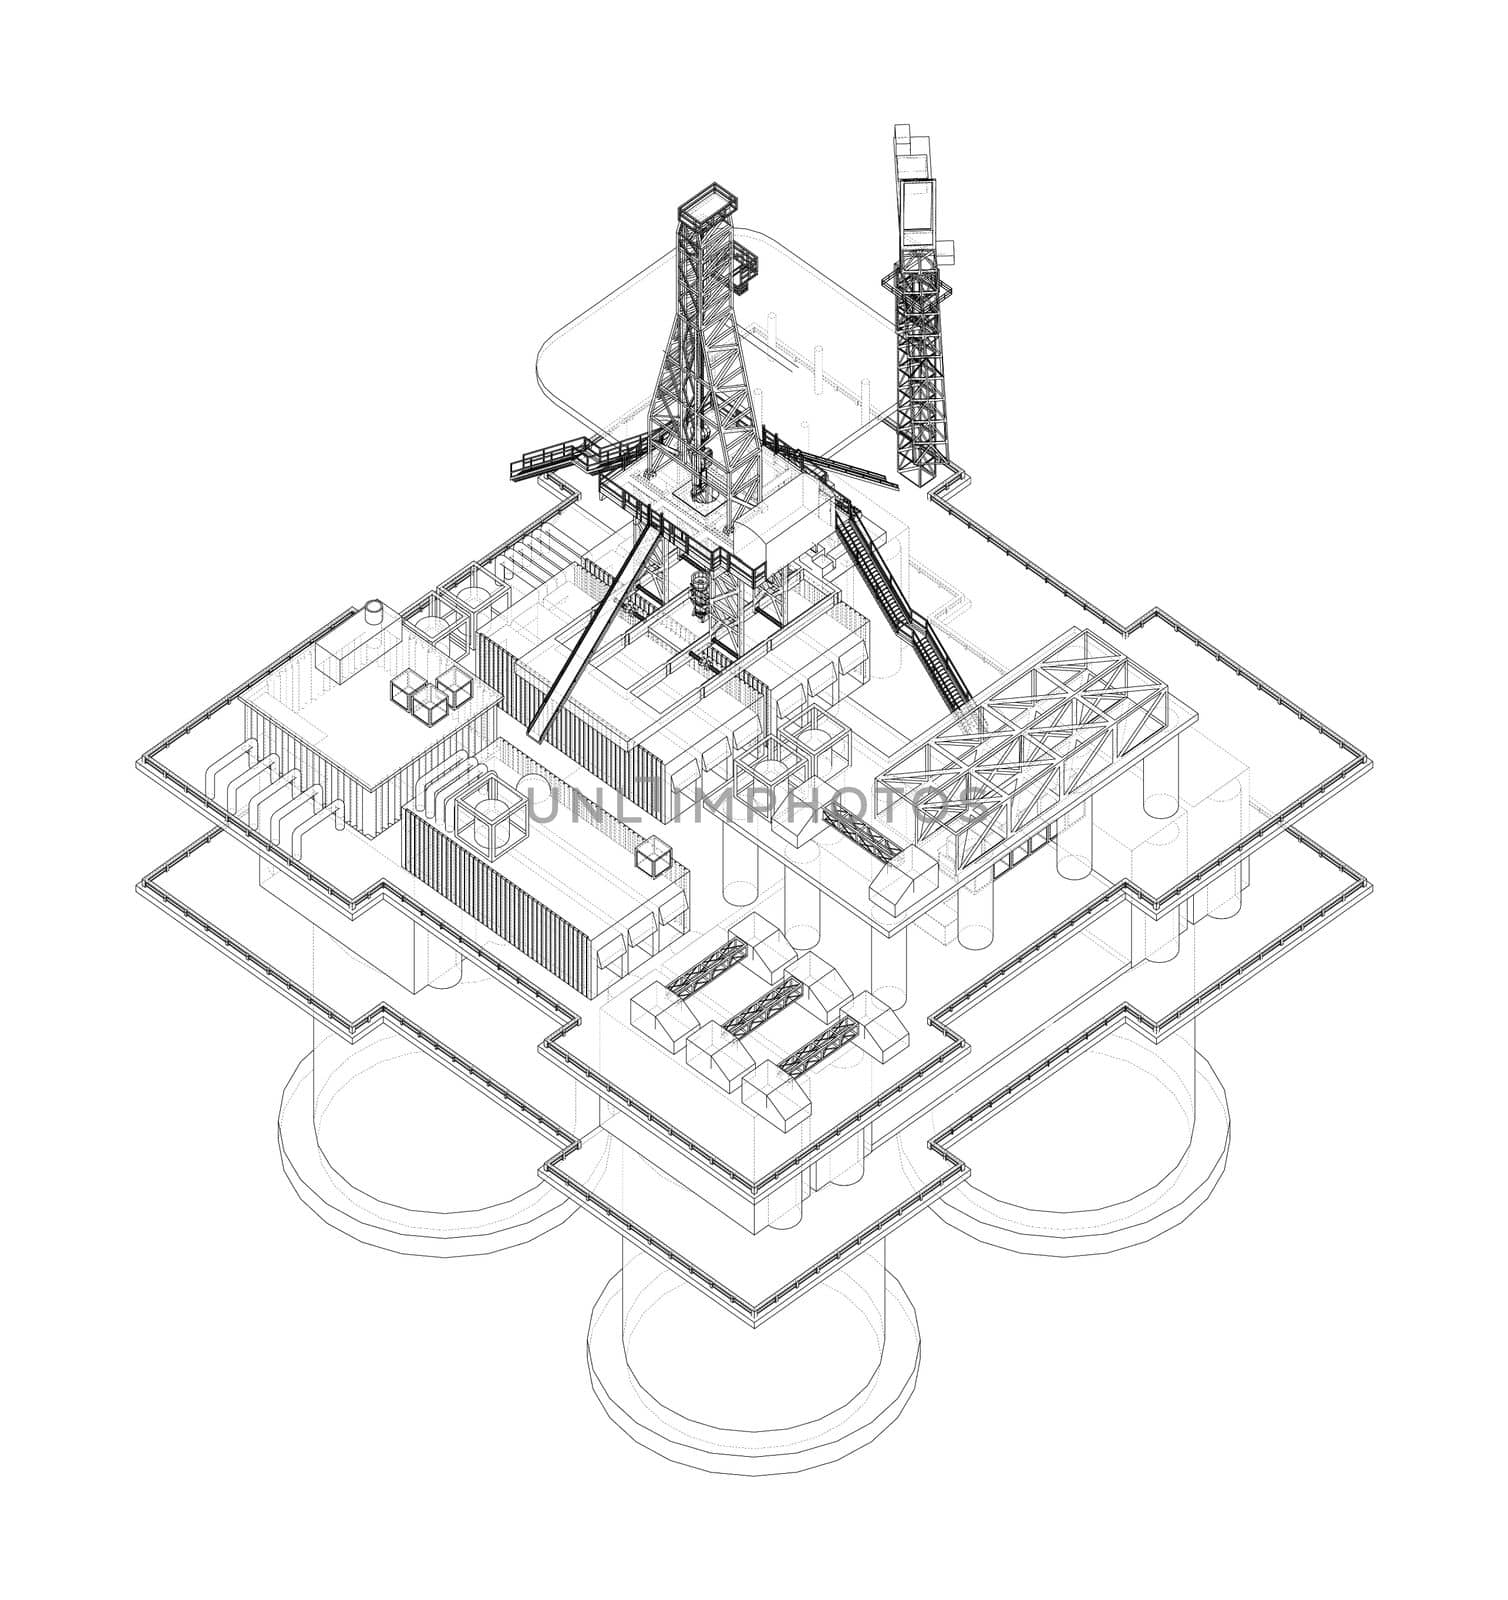 Offshore Oil Rig. 3d illustration by cherezoff